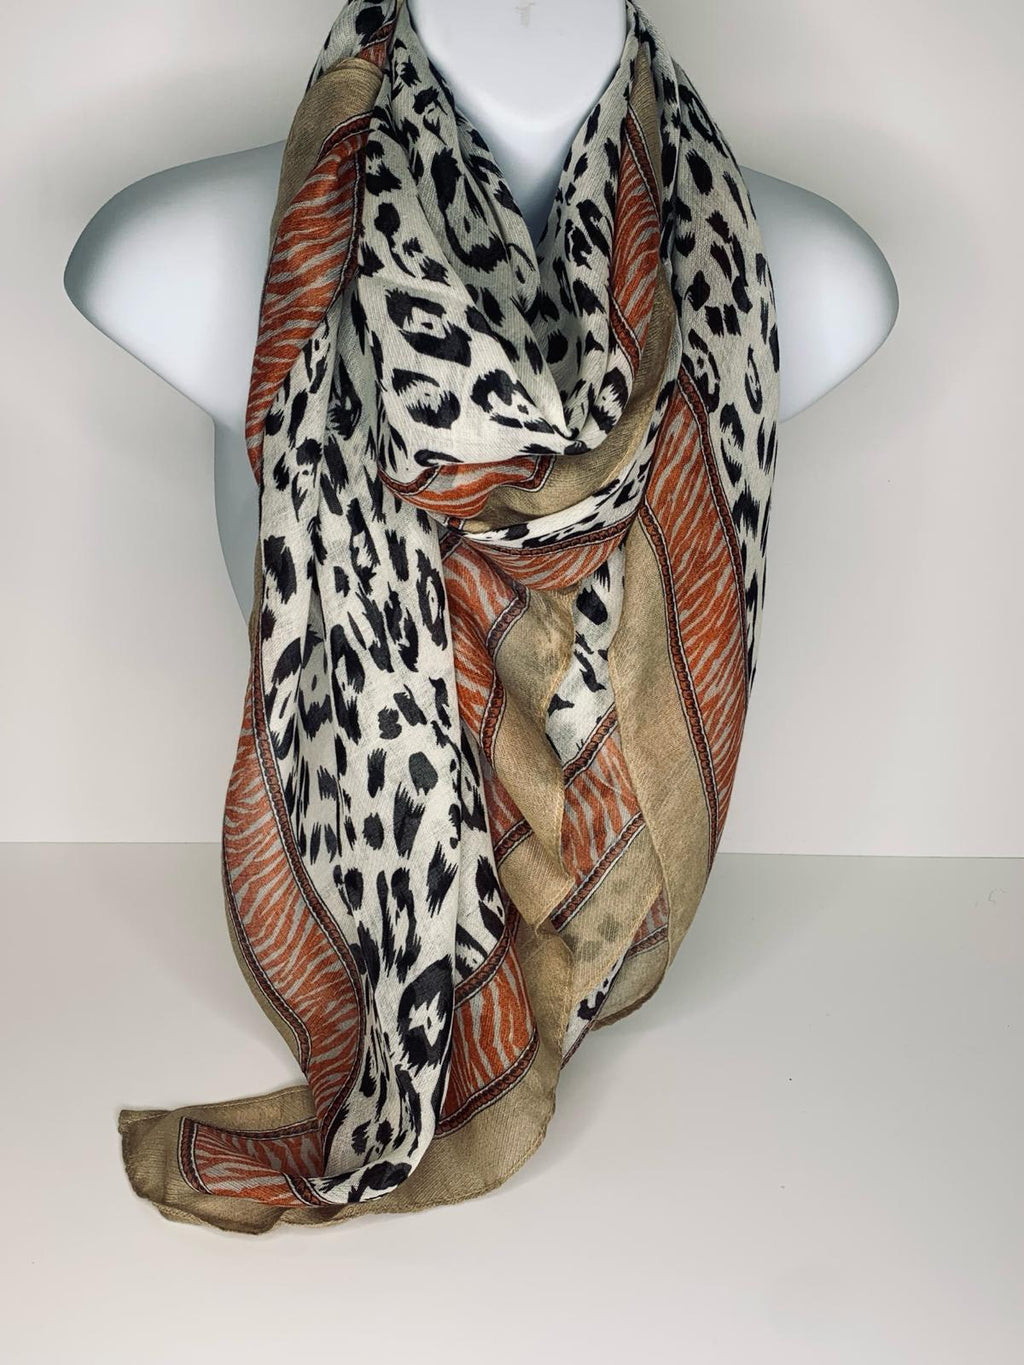 Animal print scarf in shades of white, orange, oatmeal and black